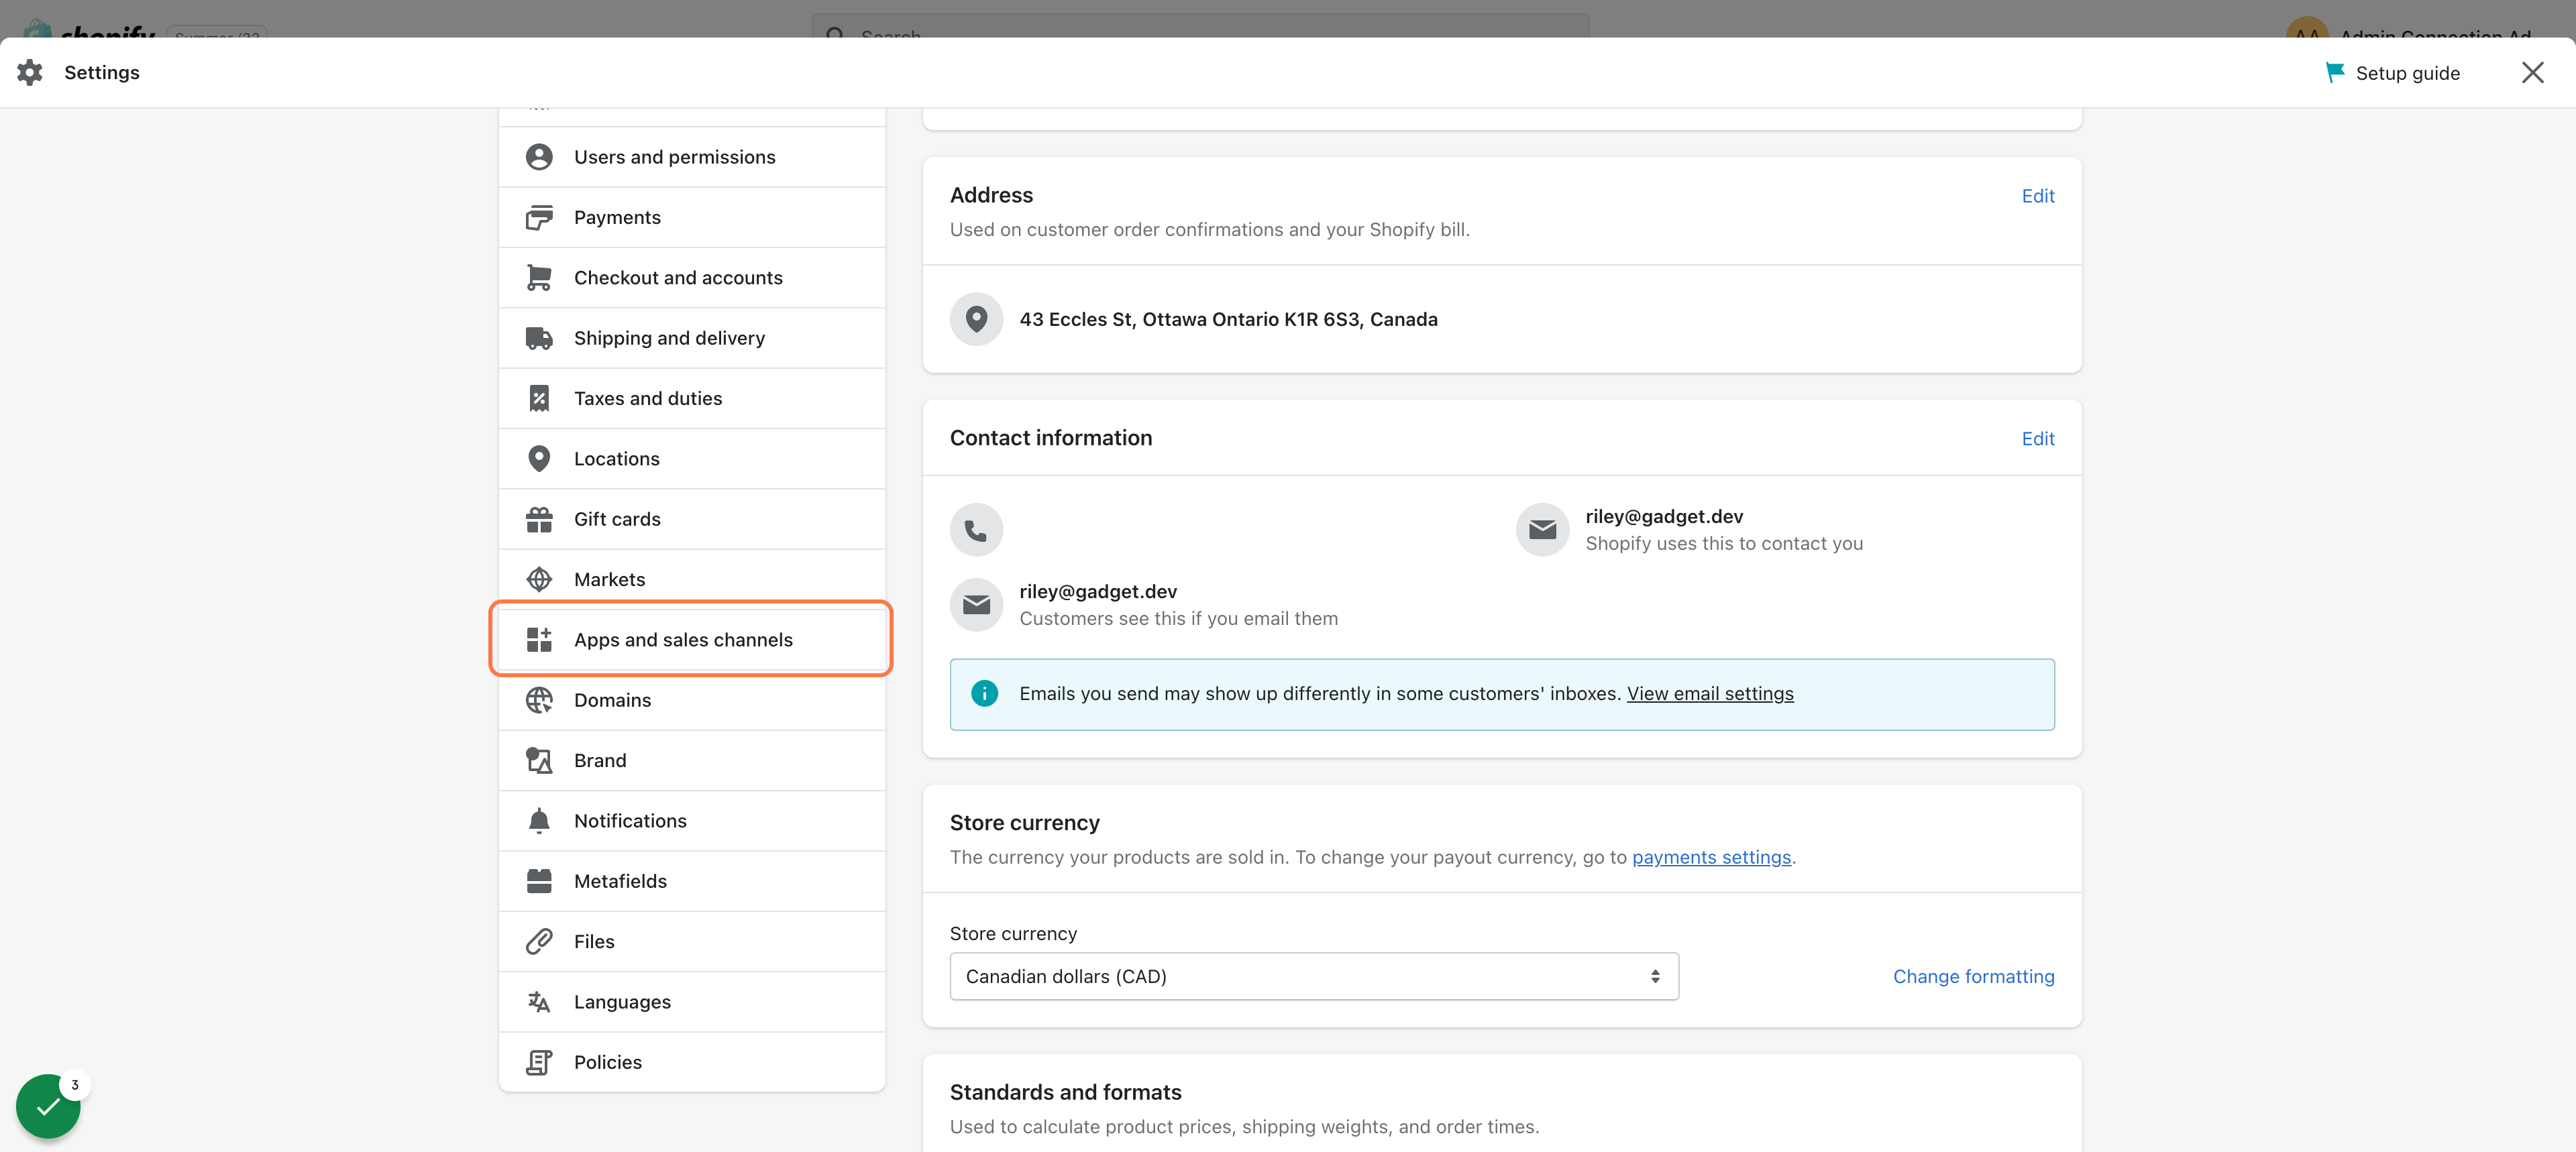 The Apps and sales channels option highlighted in the Shopify Admin settings panel